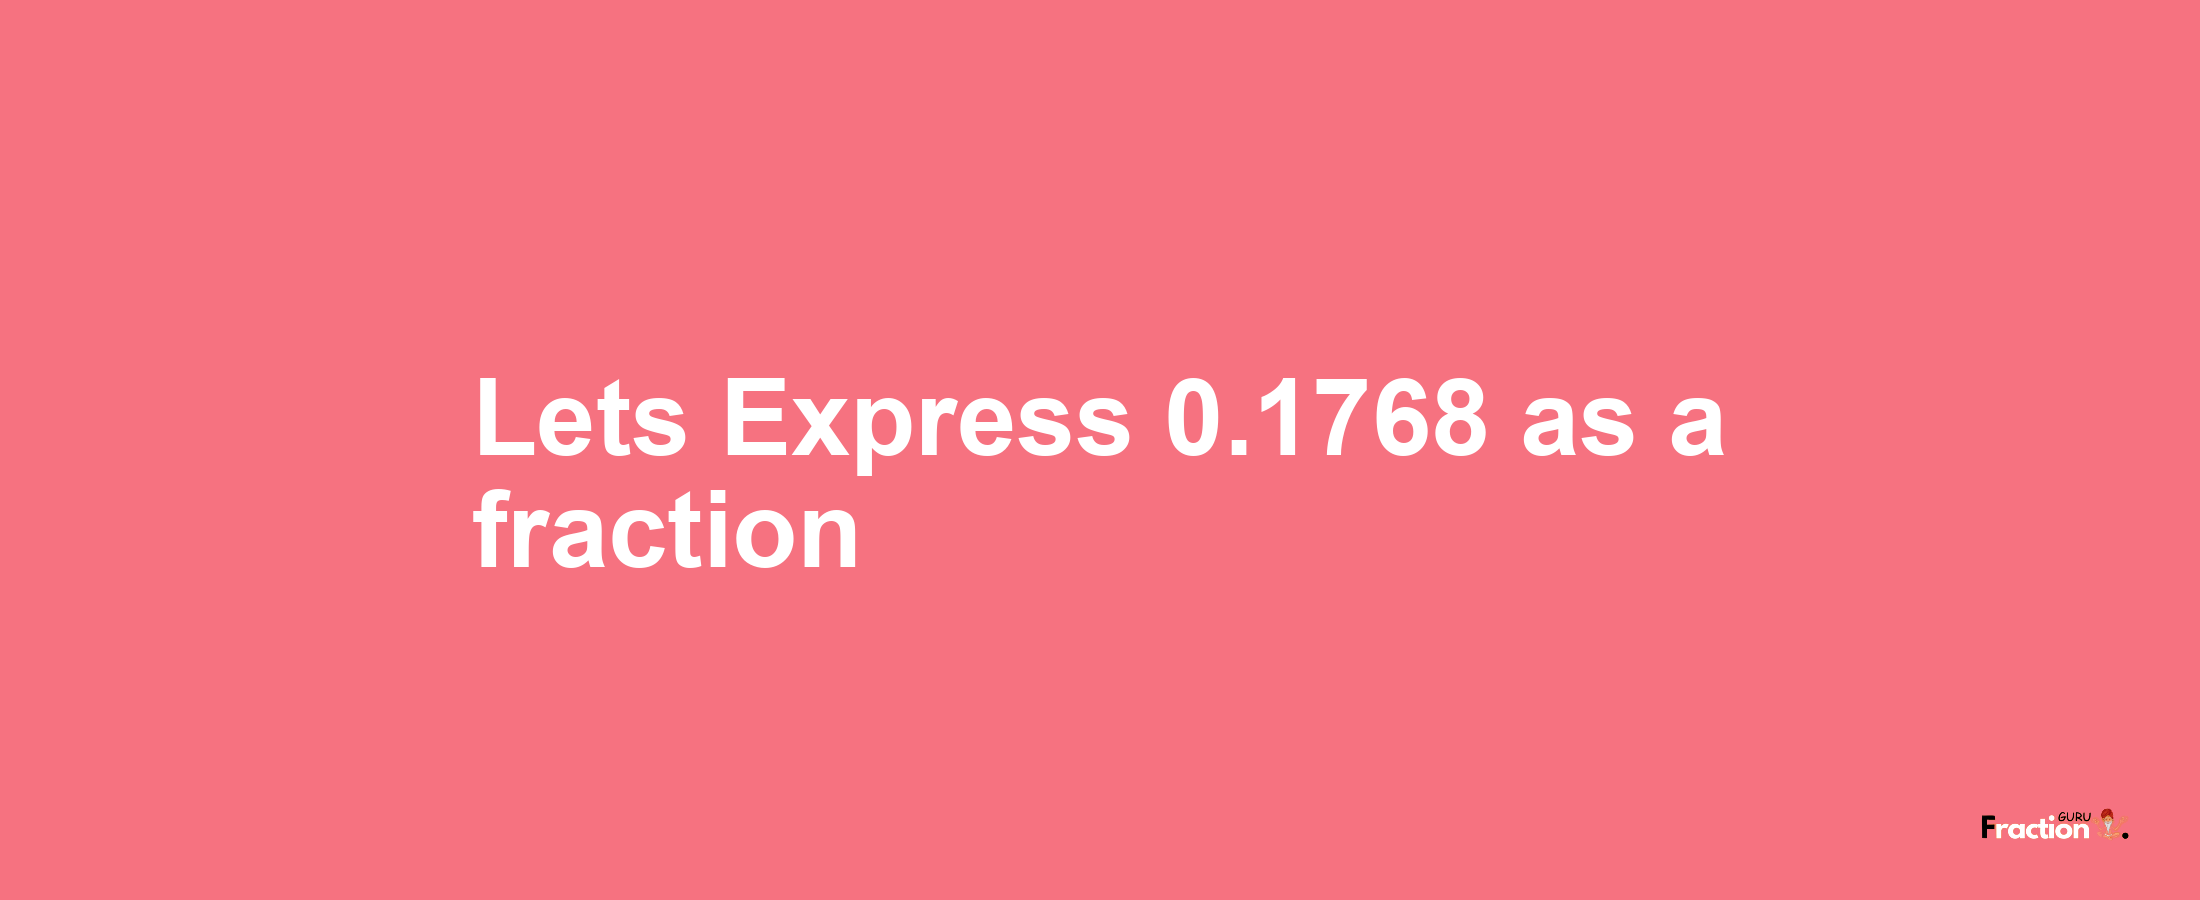 Lets Express 0.1768 as afraction